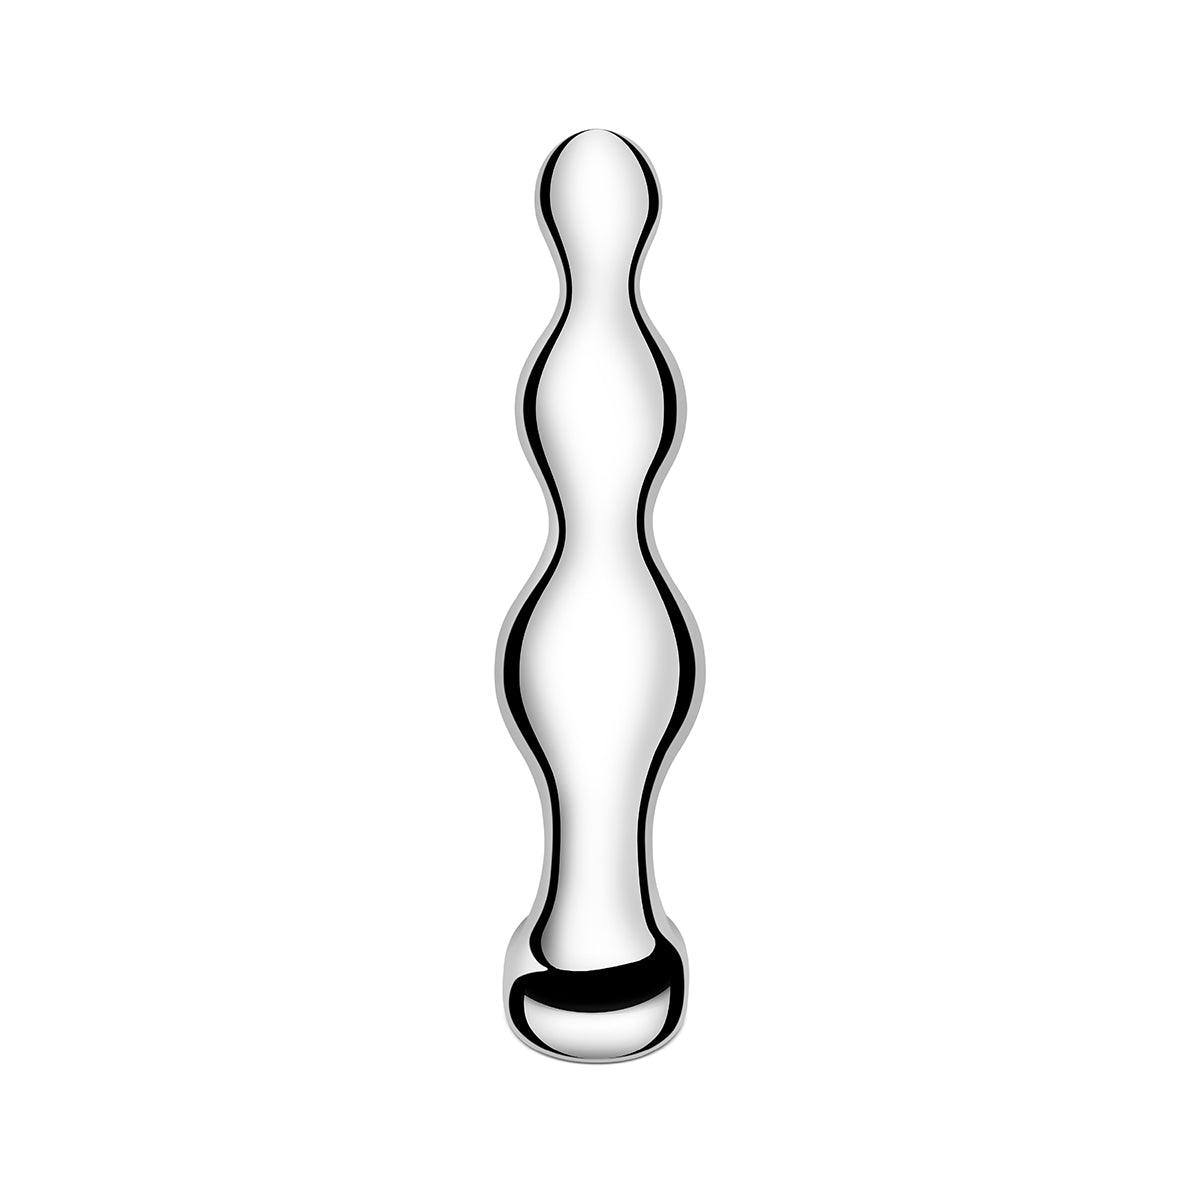 B-Vibe Stainless Steel Anal Beads - shop enby